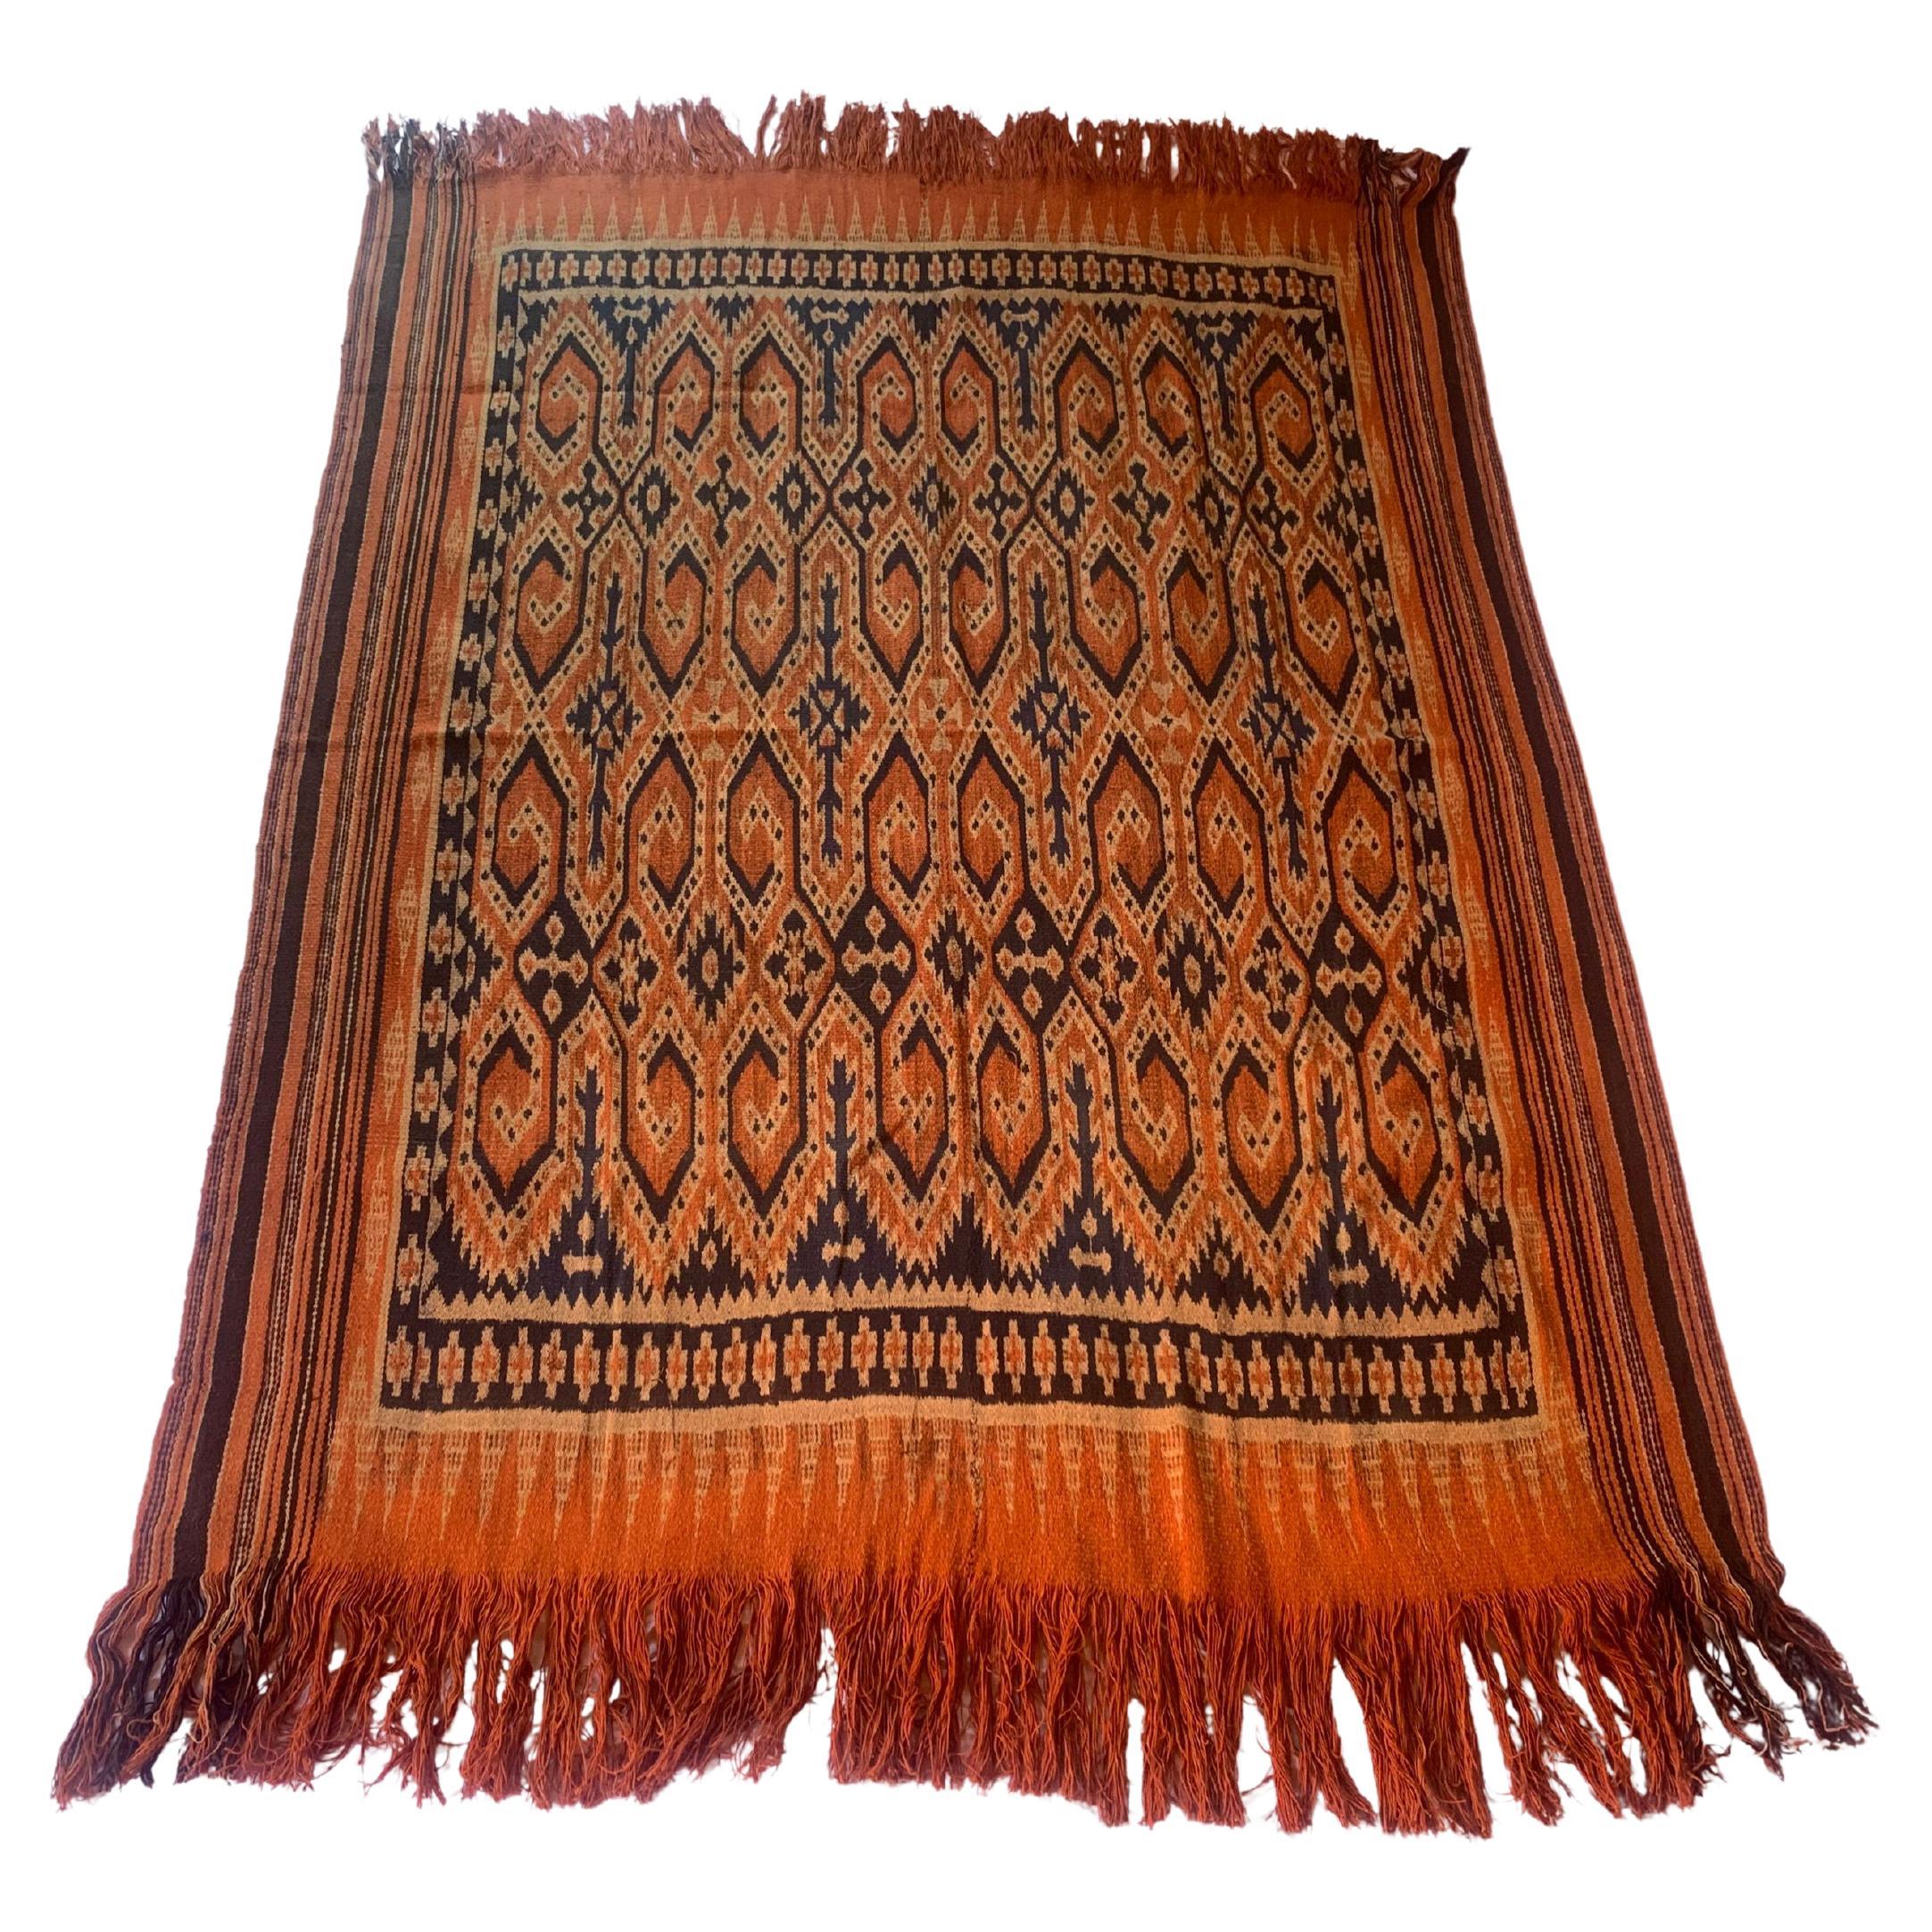 Ikat Textile from Toraja Tribe of Sulawesi with Stunning Tribal Motifs C. 1950